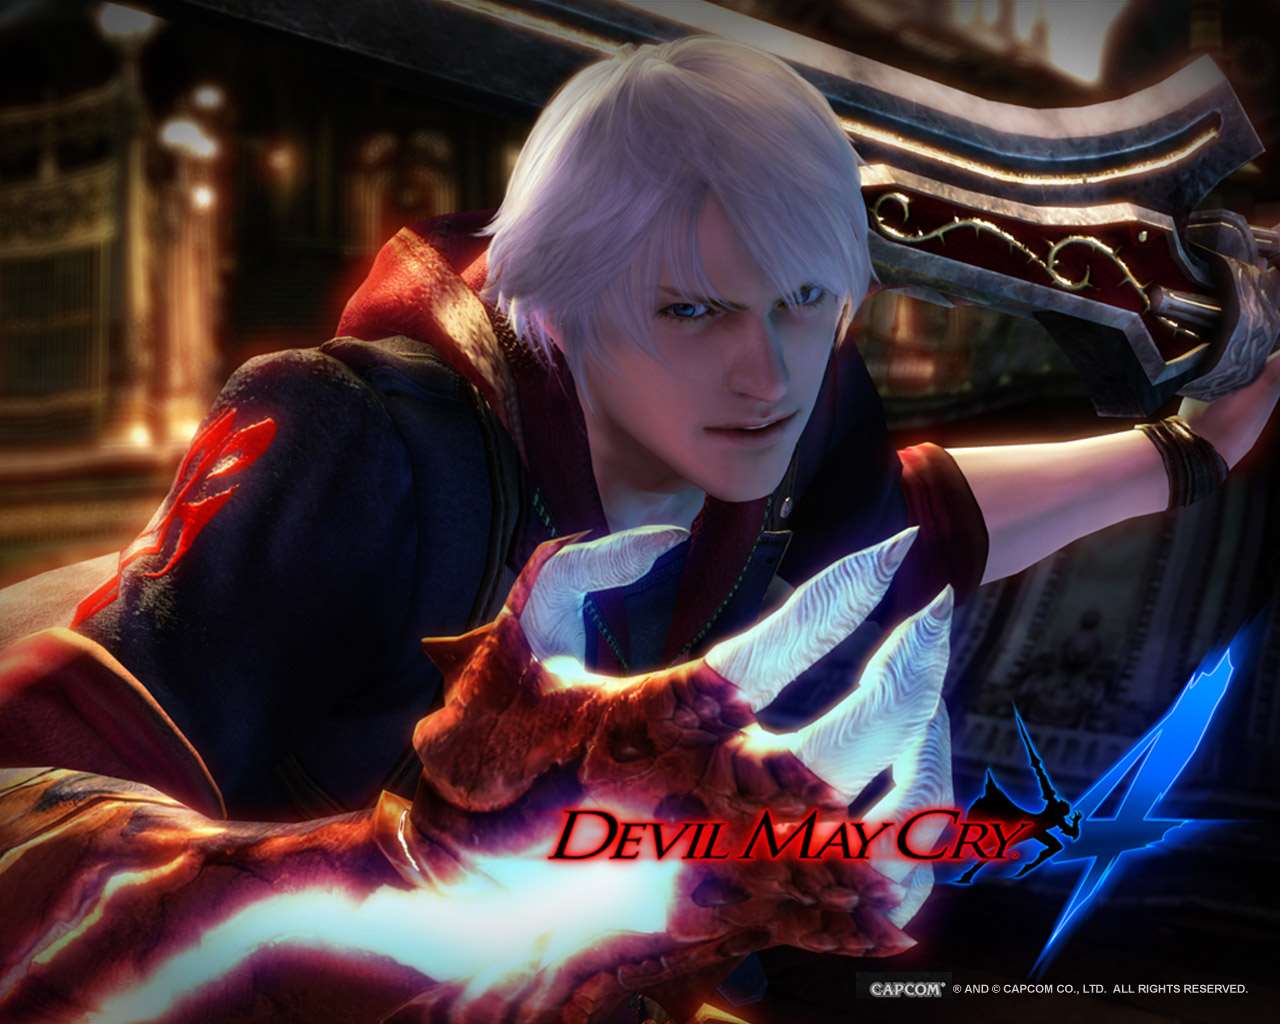 Official Devil May Cry 4 Wallpaper 4 (1280 x 1024)